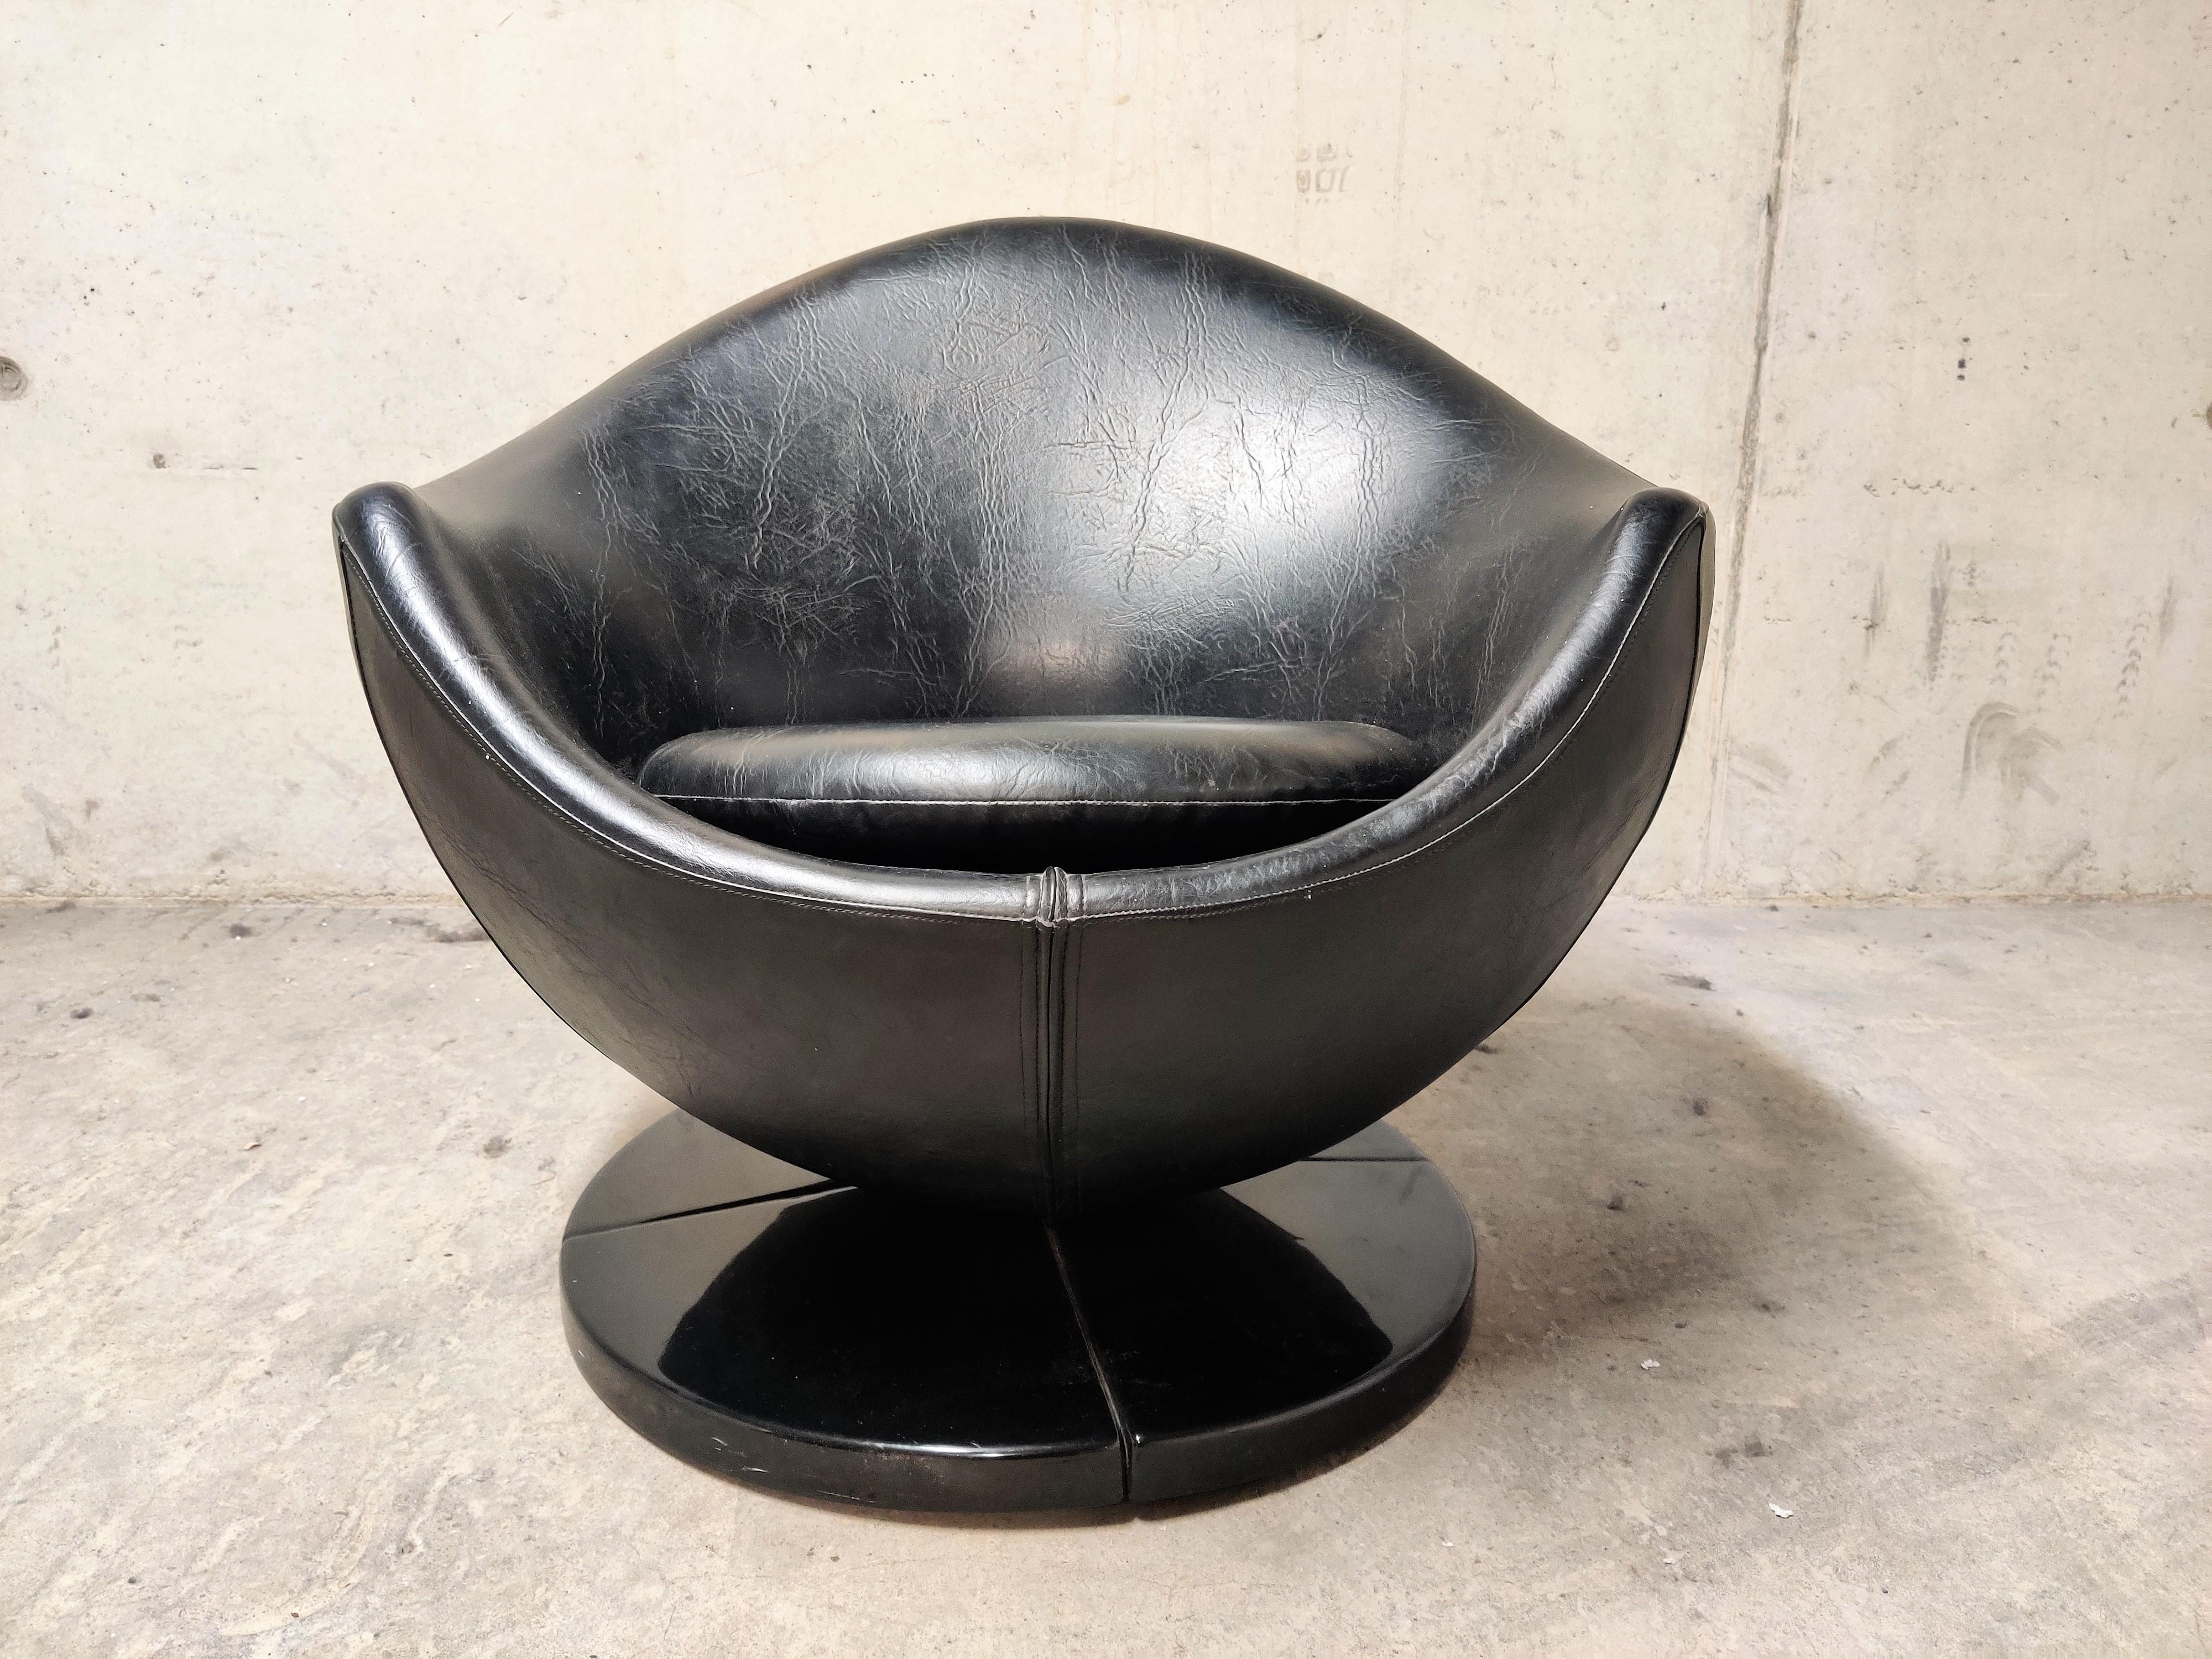 Midcentury swivel lounge chair model 'mars' designed by Pierre Guariche for Meurop.

The chair has a star shaped metal base with the intact original plastic cover and a with leatherette upholstered shell.

The chair is in good condition, with